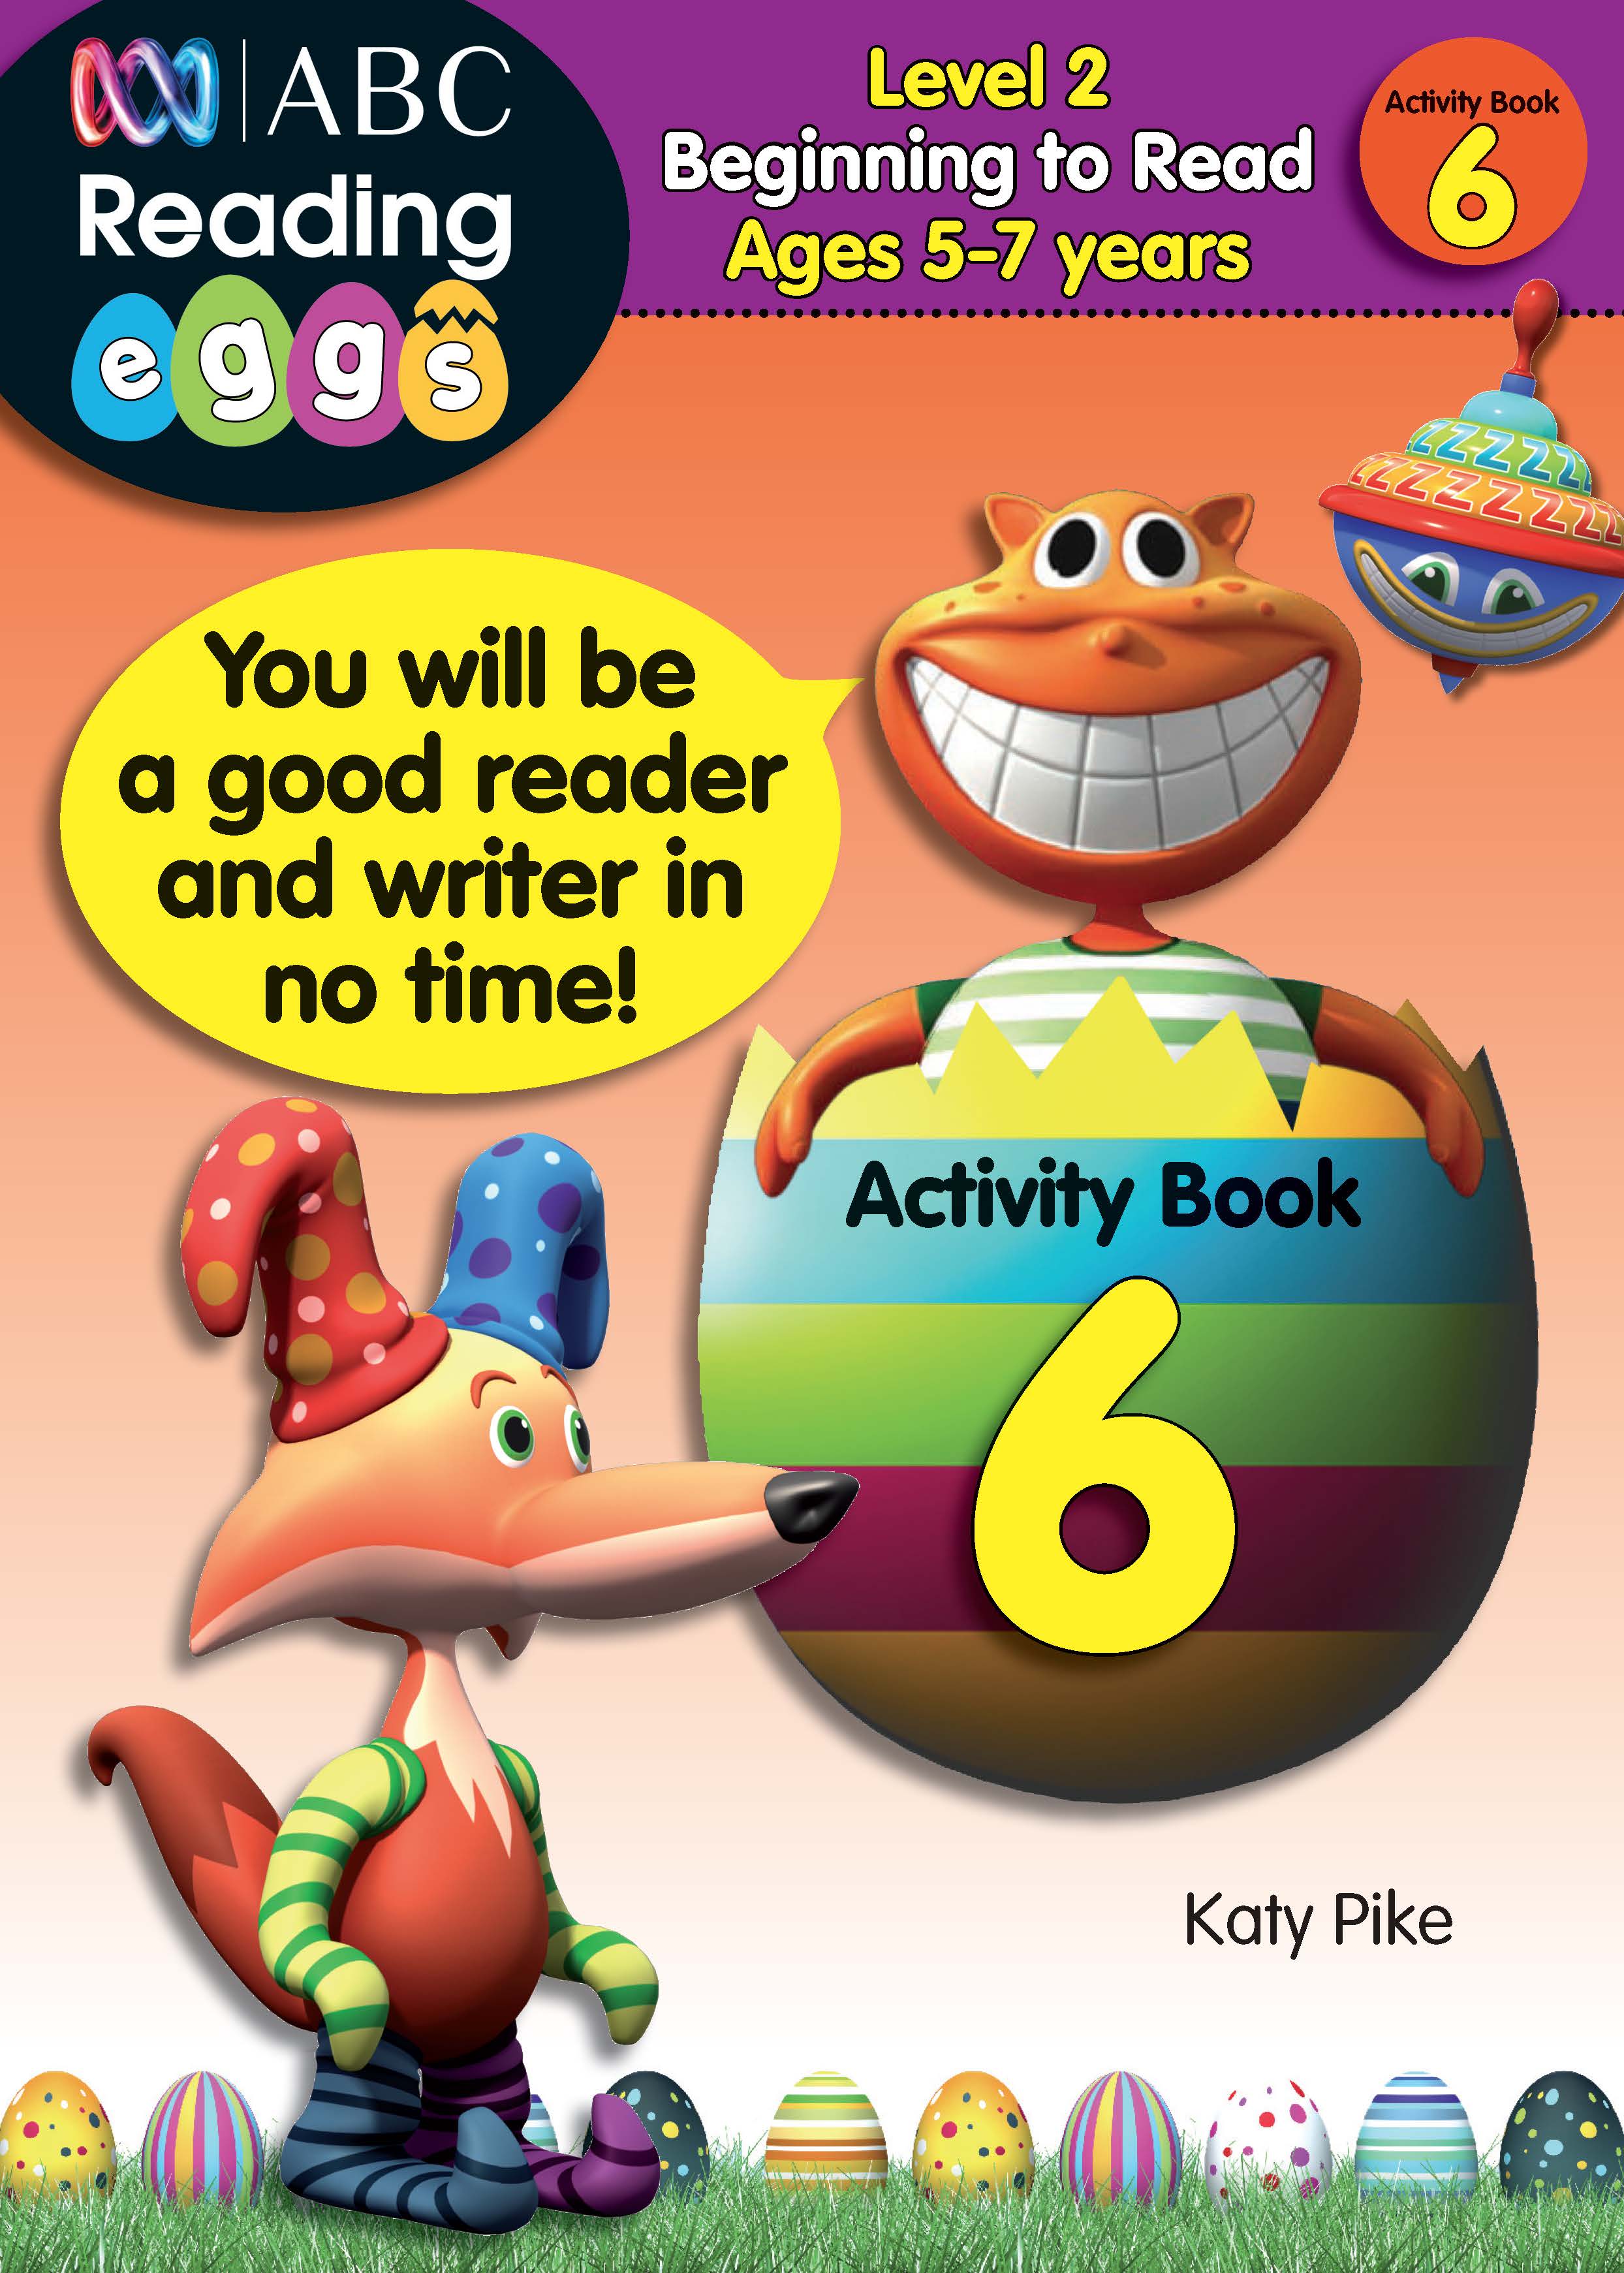 Picture of ABC Reading Eggs Level 2 Beginning to Read Activity Book 6 Ages 5-7